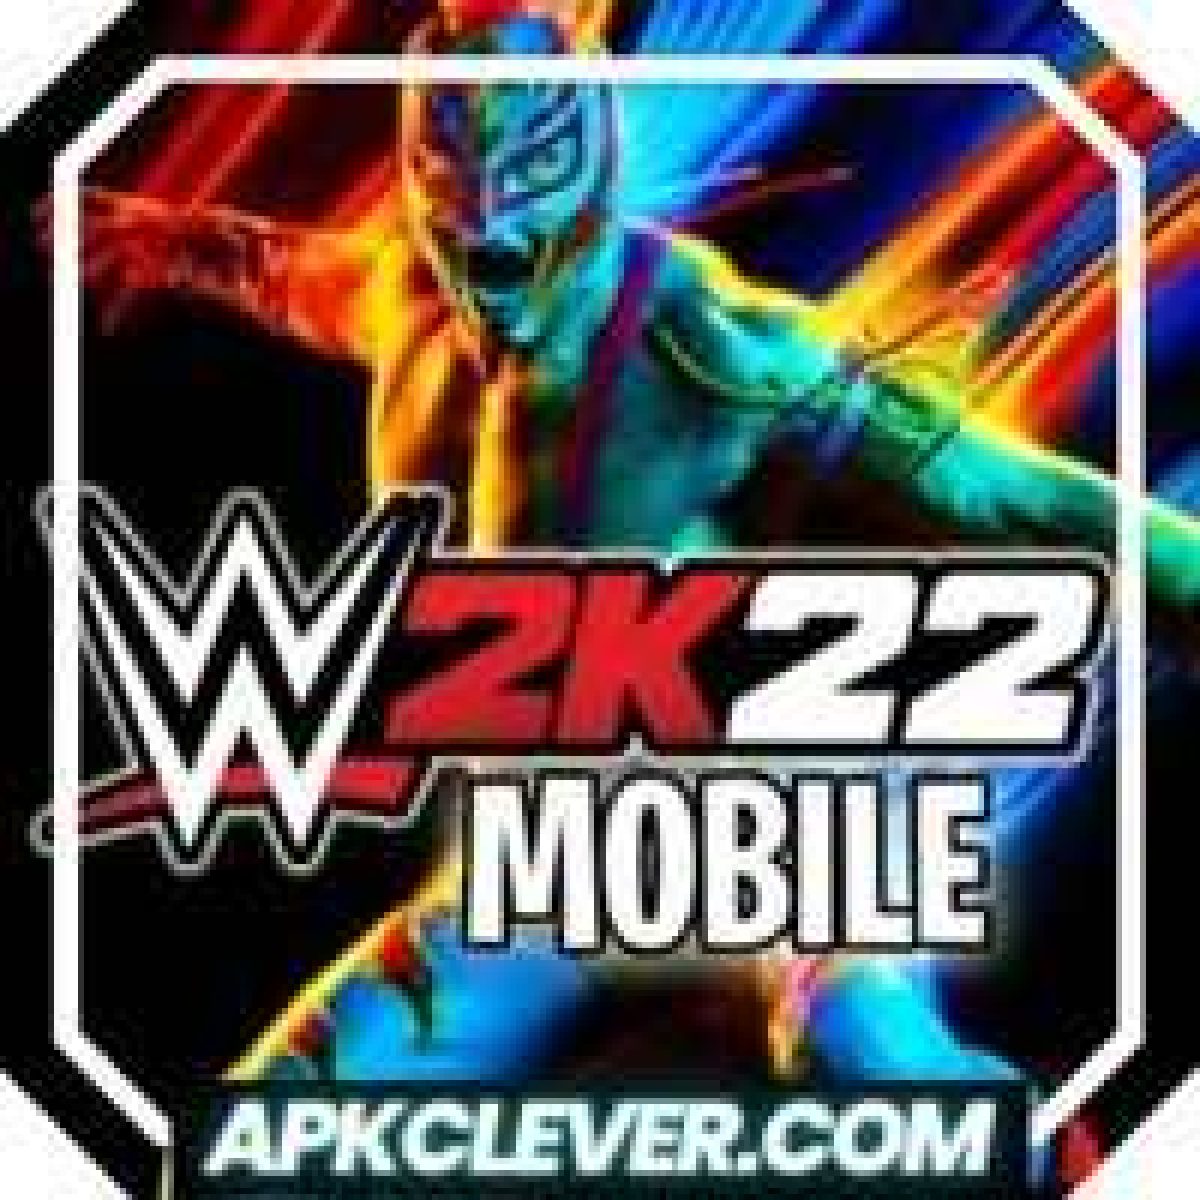 WWE 2K22 Zip File Download For Android –  PPSSPP